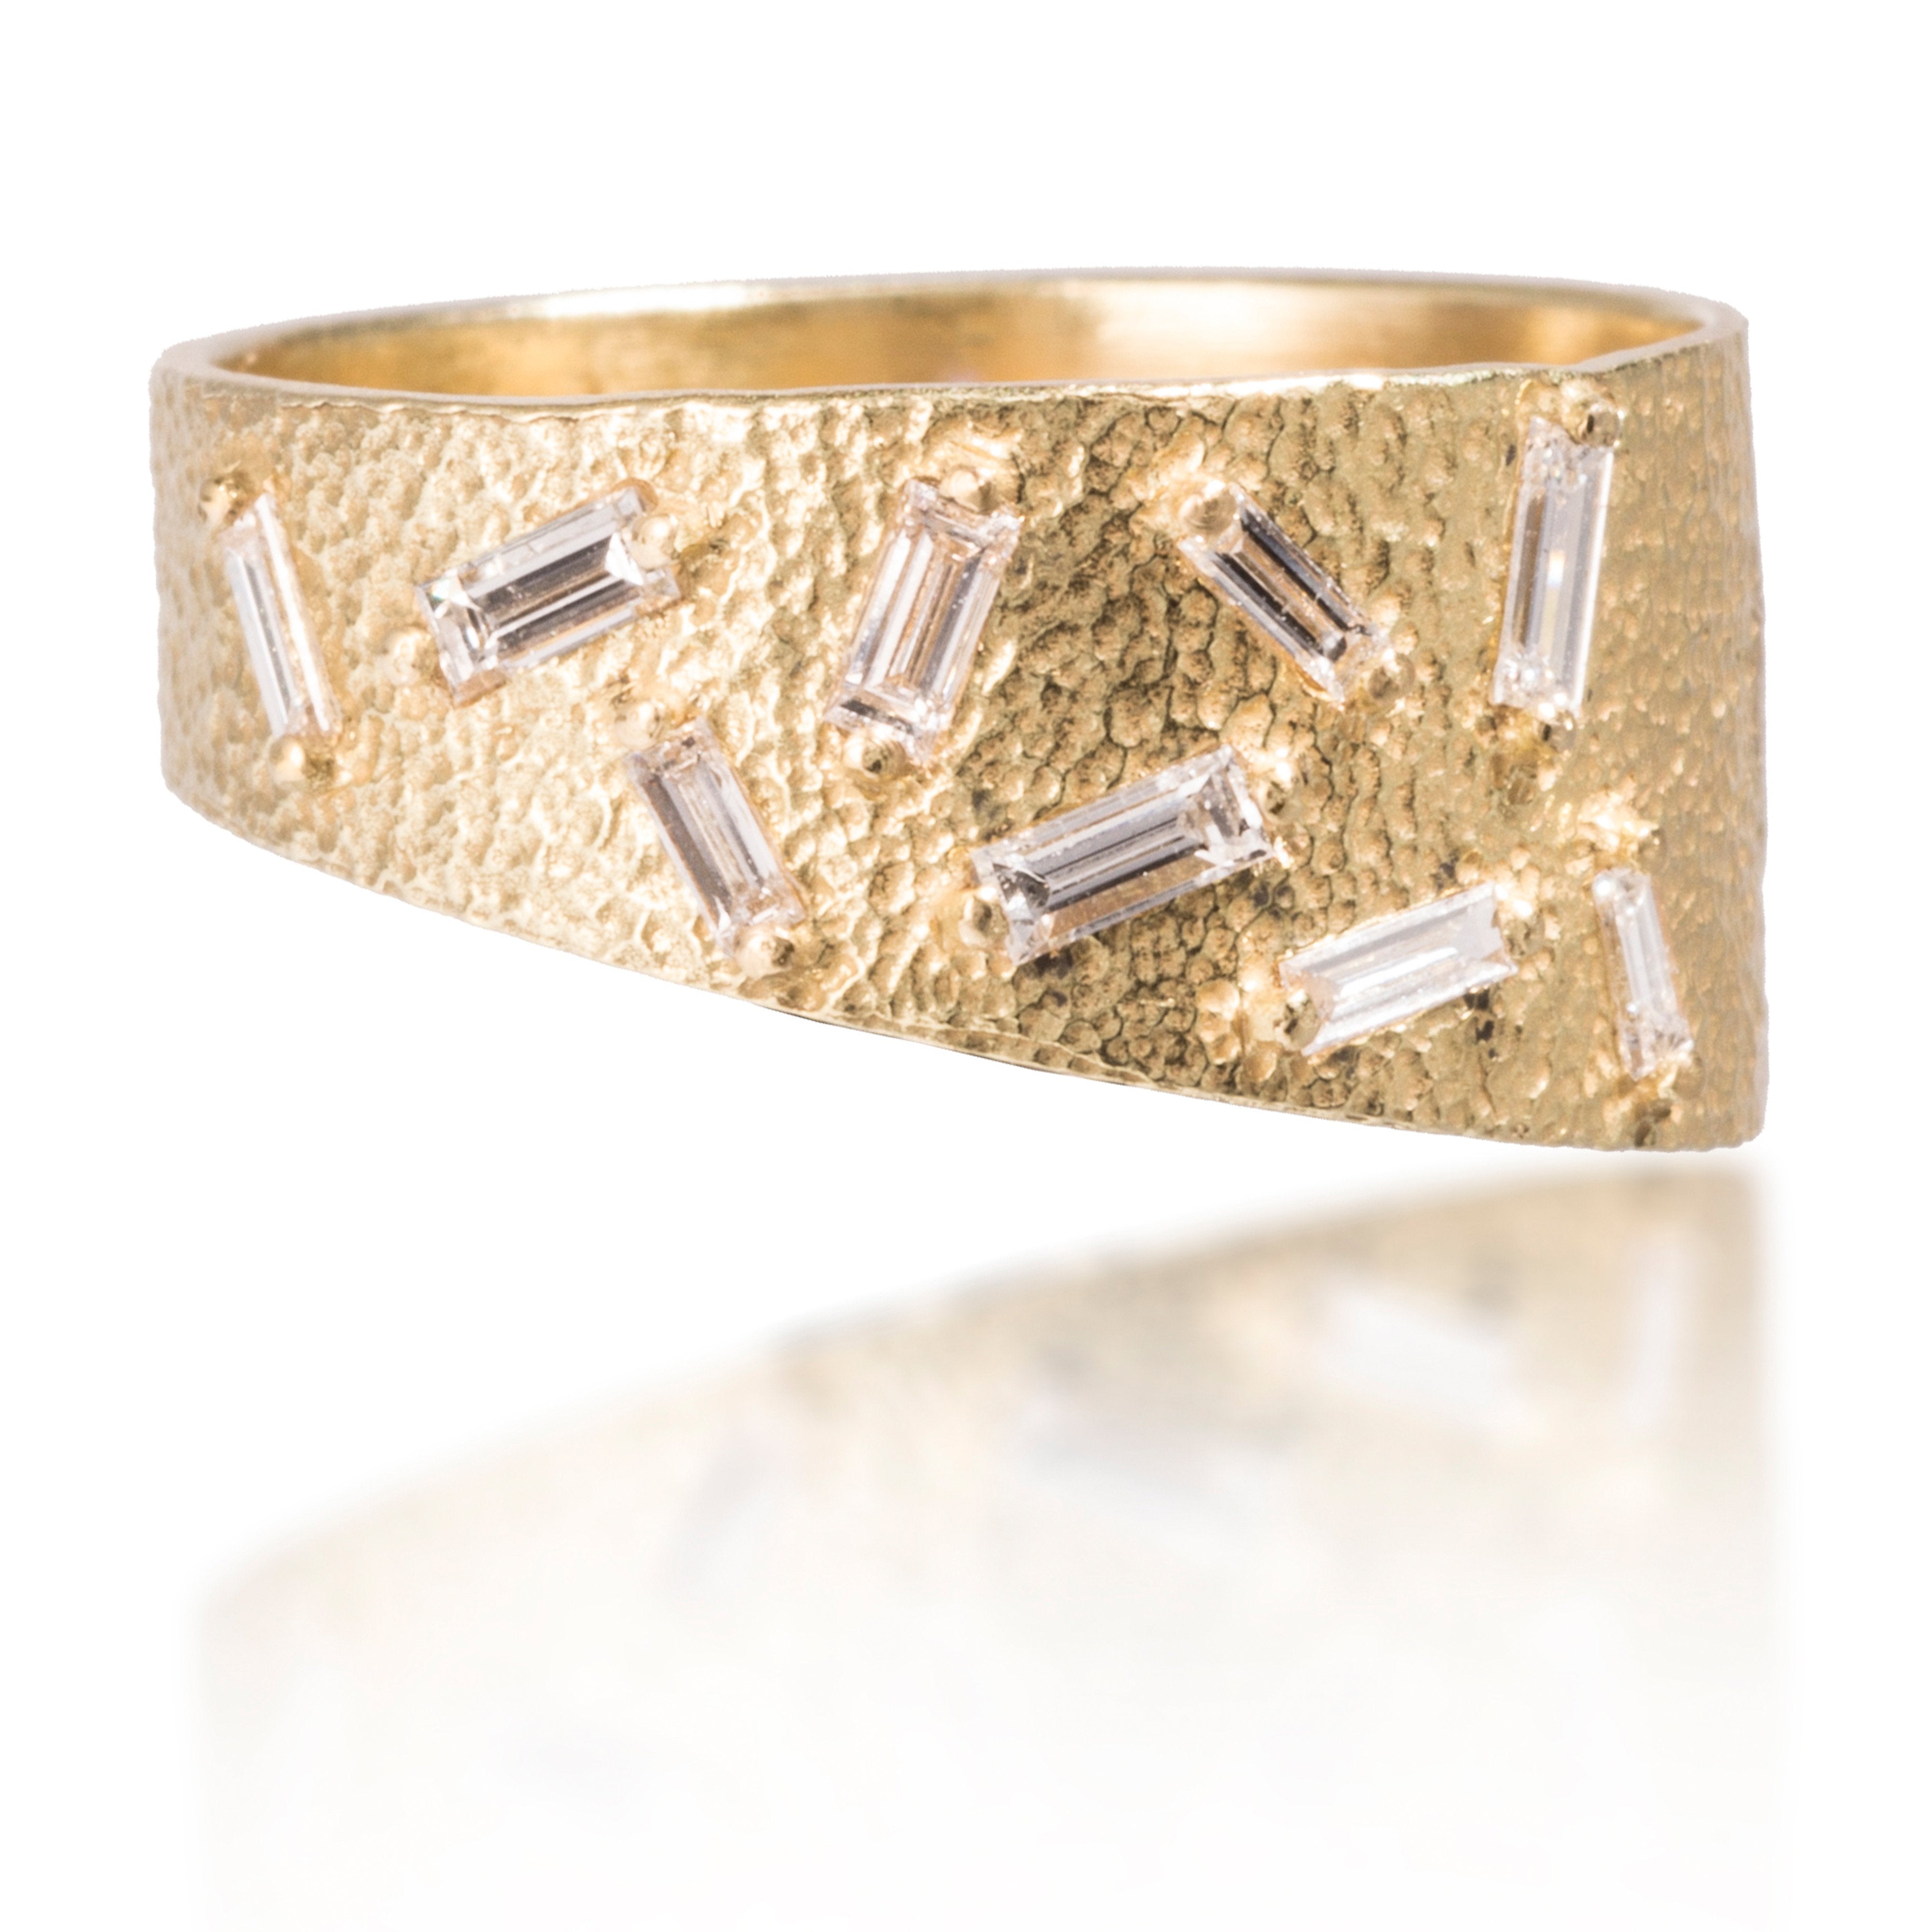 This stackable ring is set with 9 white diamond baguettes. It is available in four richly textured color ways, oxidized silver, 18k gold, palladium and platinum. 0.2798 tcw.